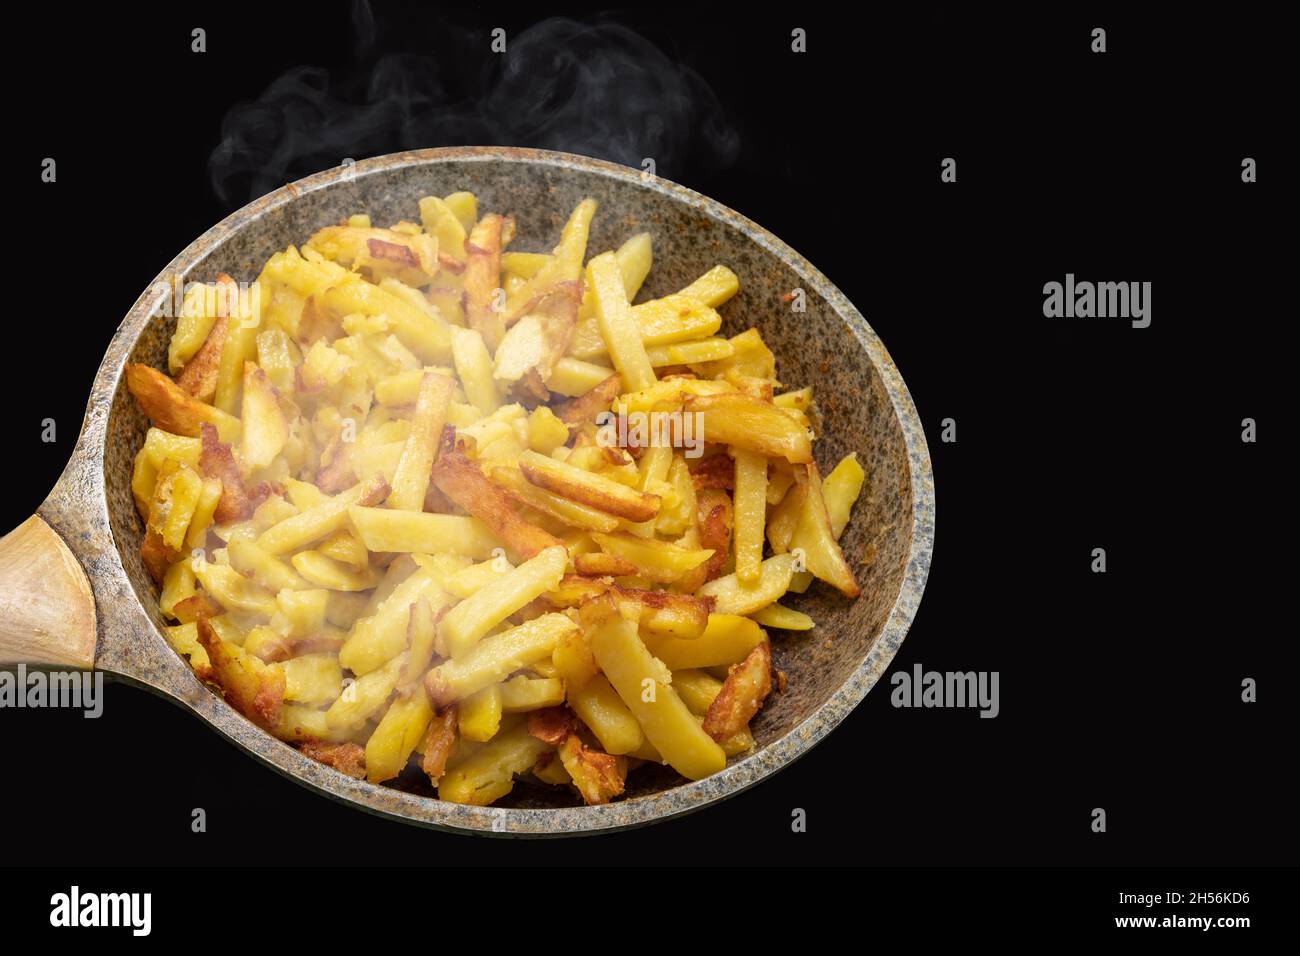 Delicious crispy golden hot fried potato wedges on an old metal frying pan close-up. Steaming freshly cooked homemade fried potatoes in frying pan iso Stock Photo